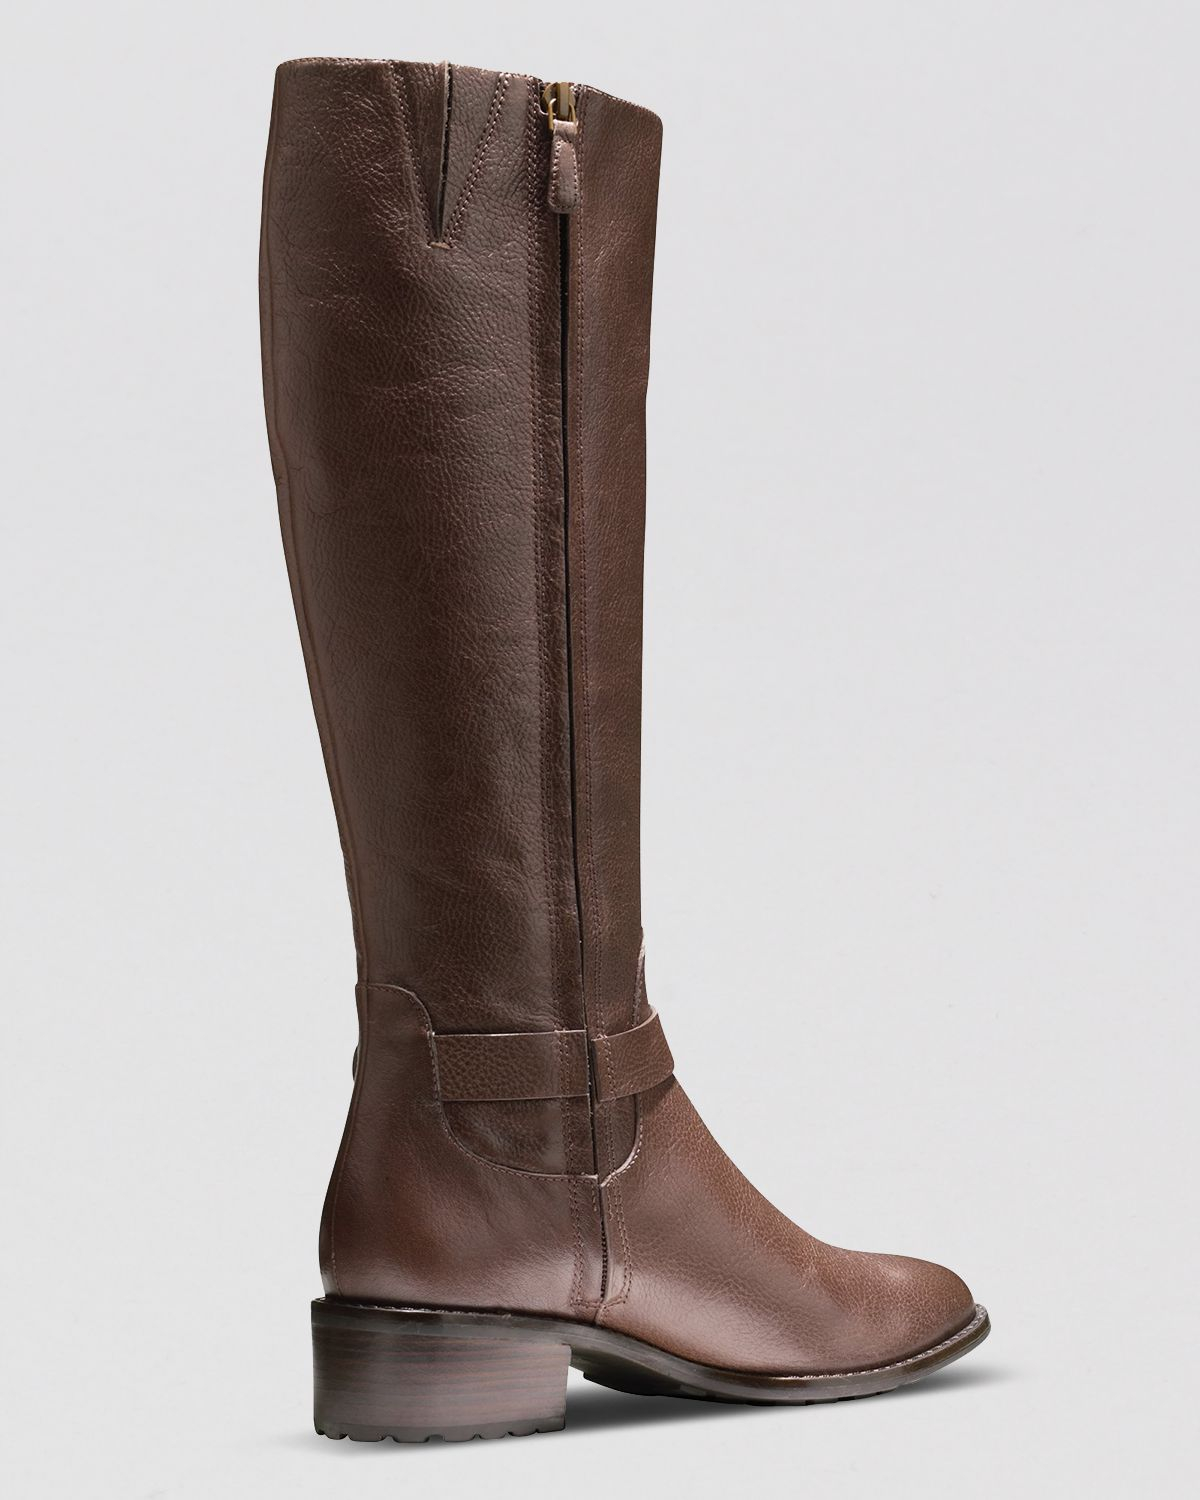 Cole Haan Tall Riding Boots - Kenmare in Brown - Lyst